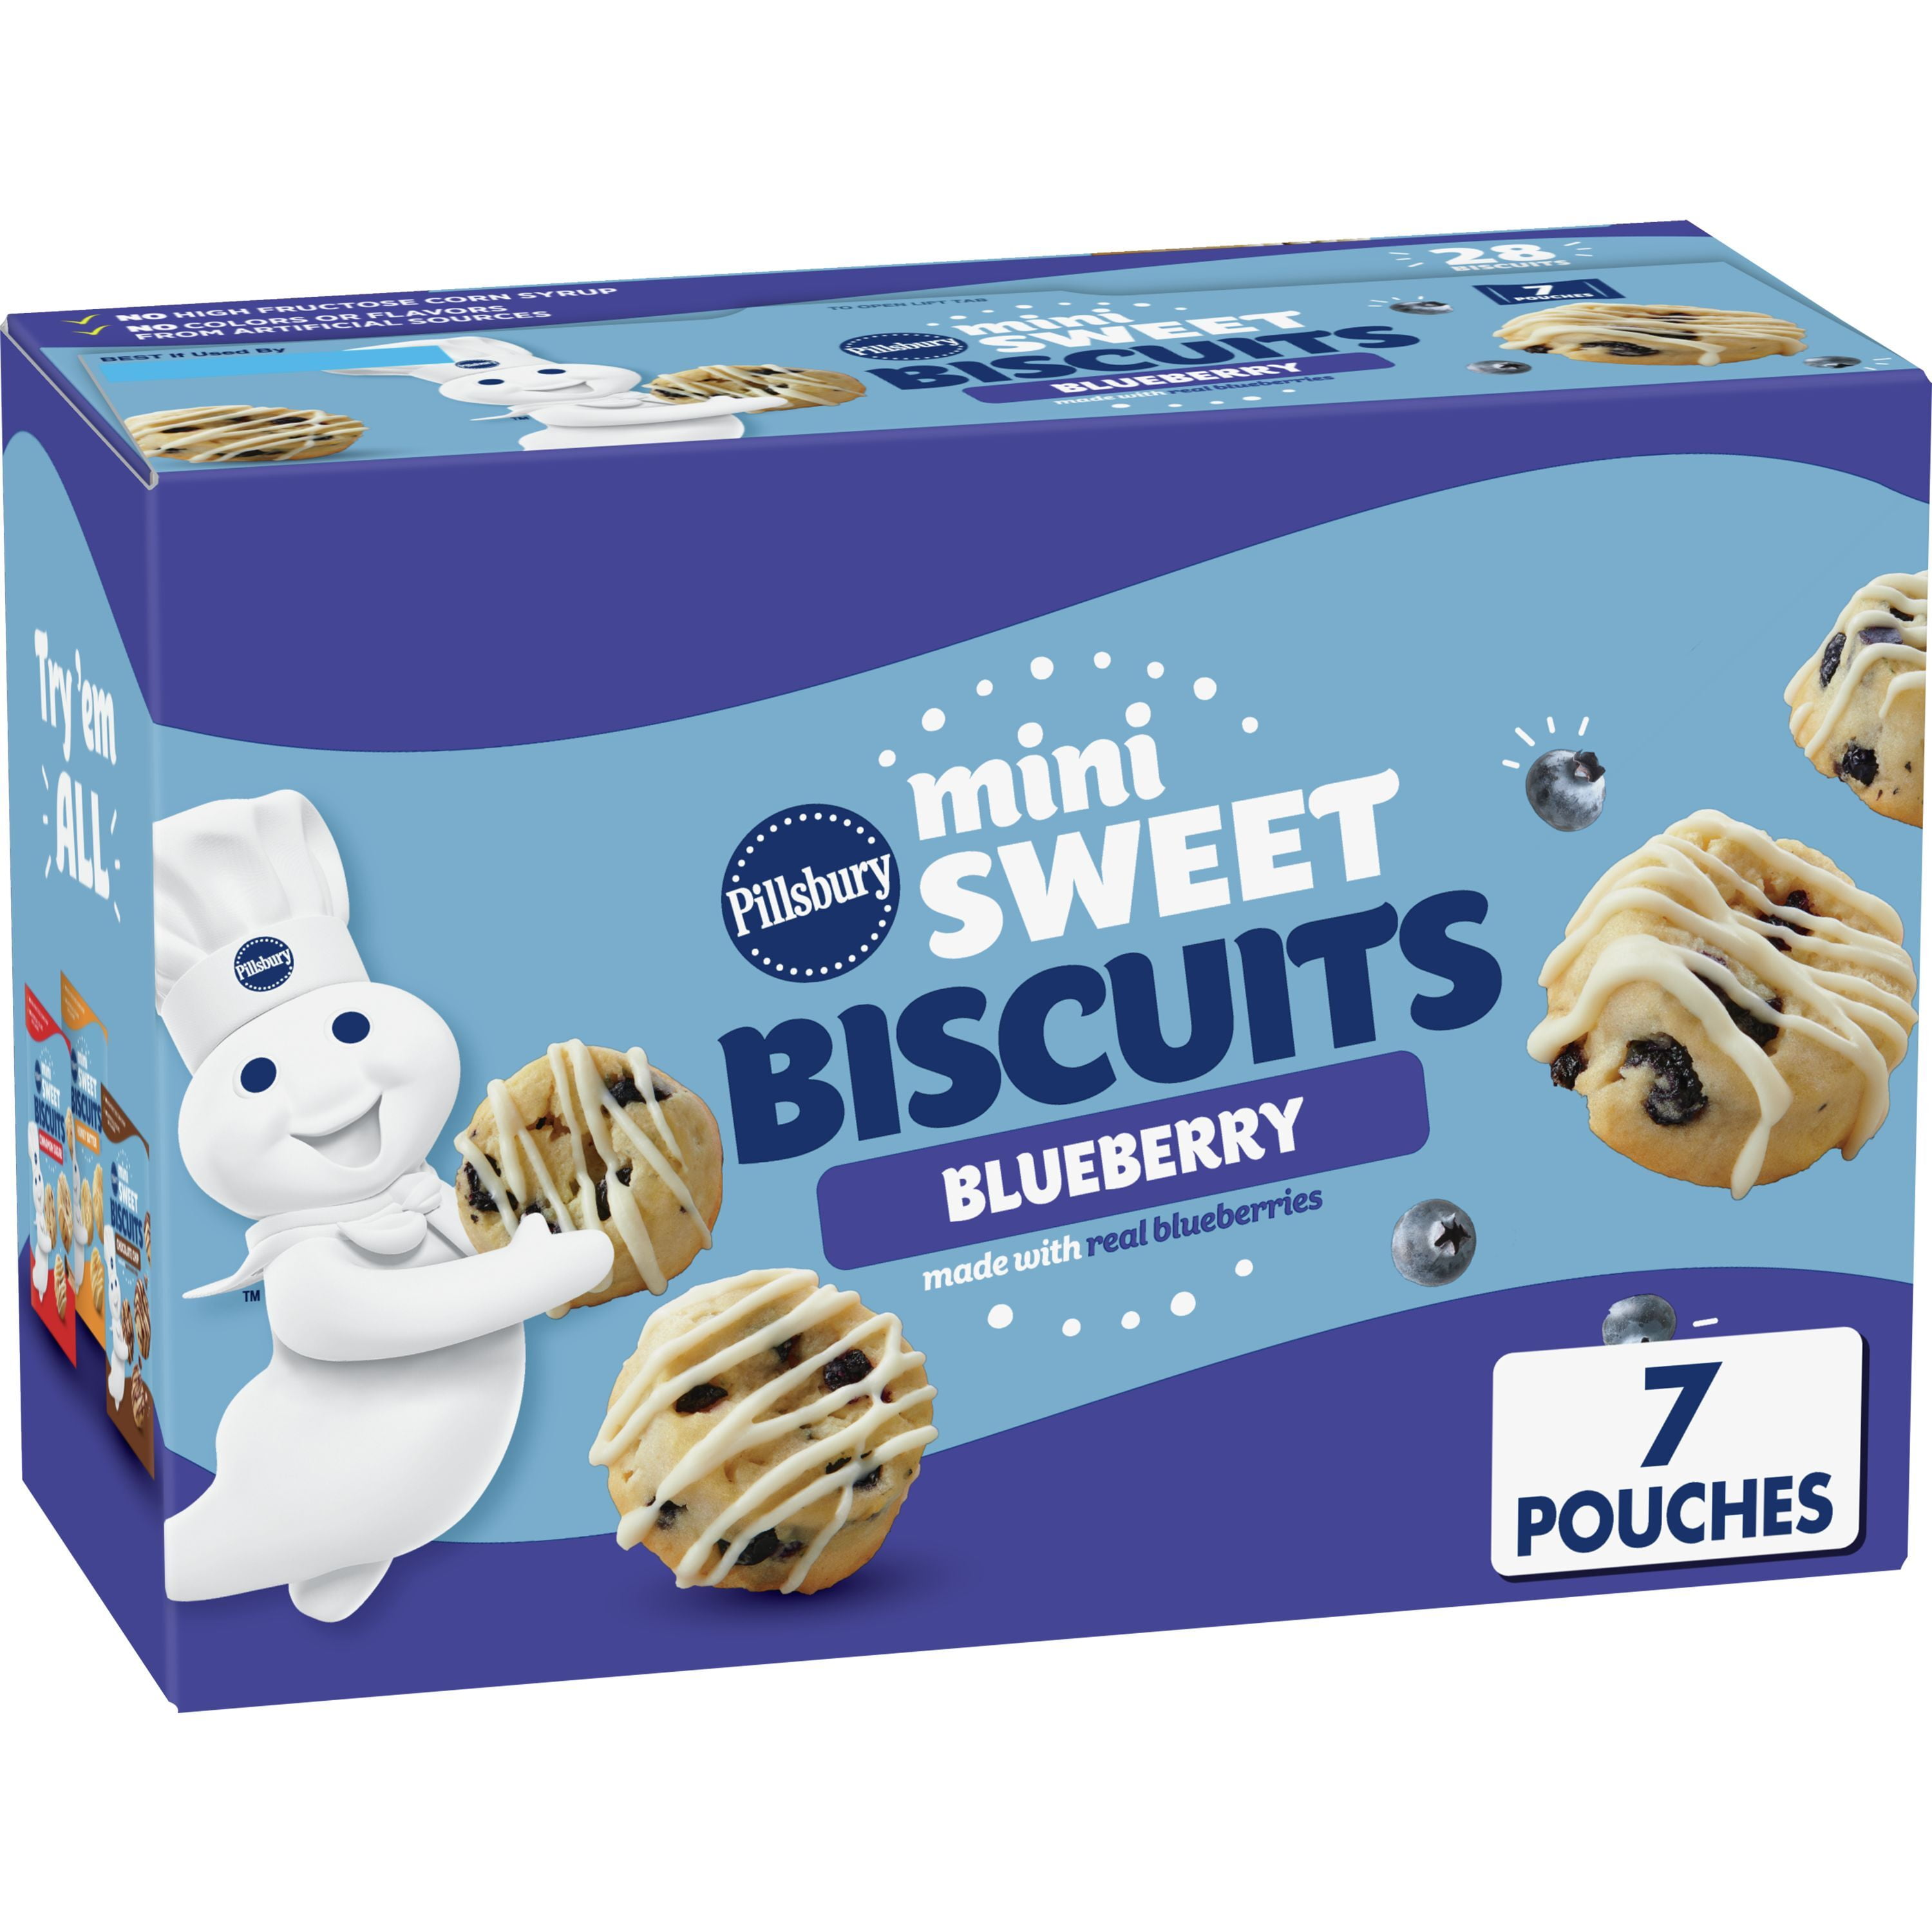 Pillsbury Soft Baked Mini Sweet Biscuits, Blueberry, 28 ct